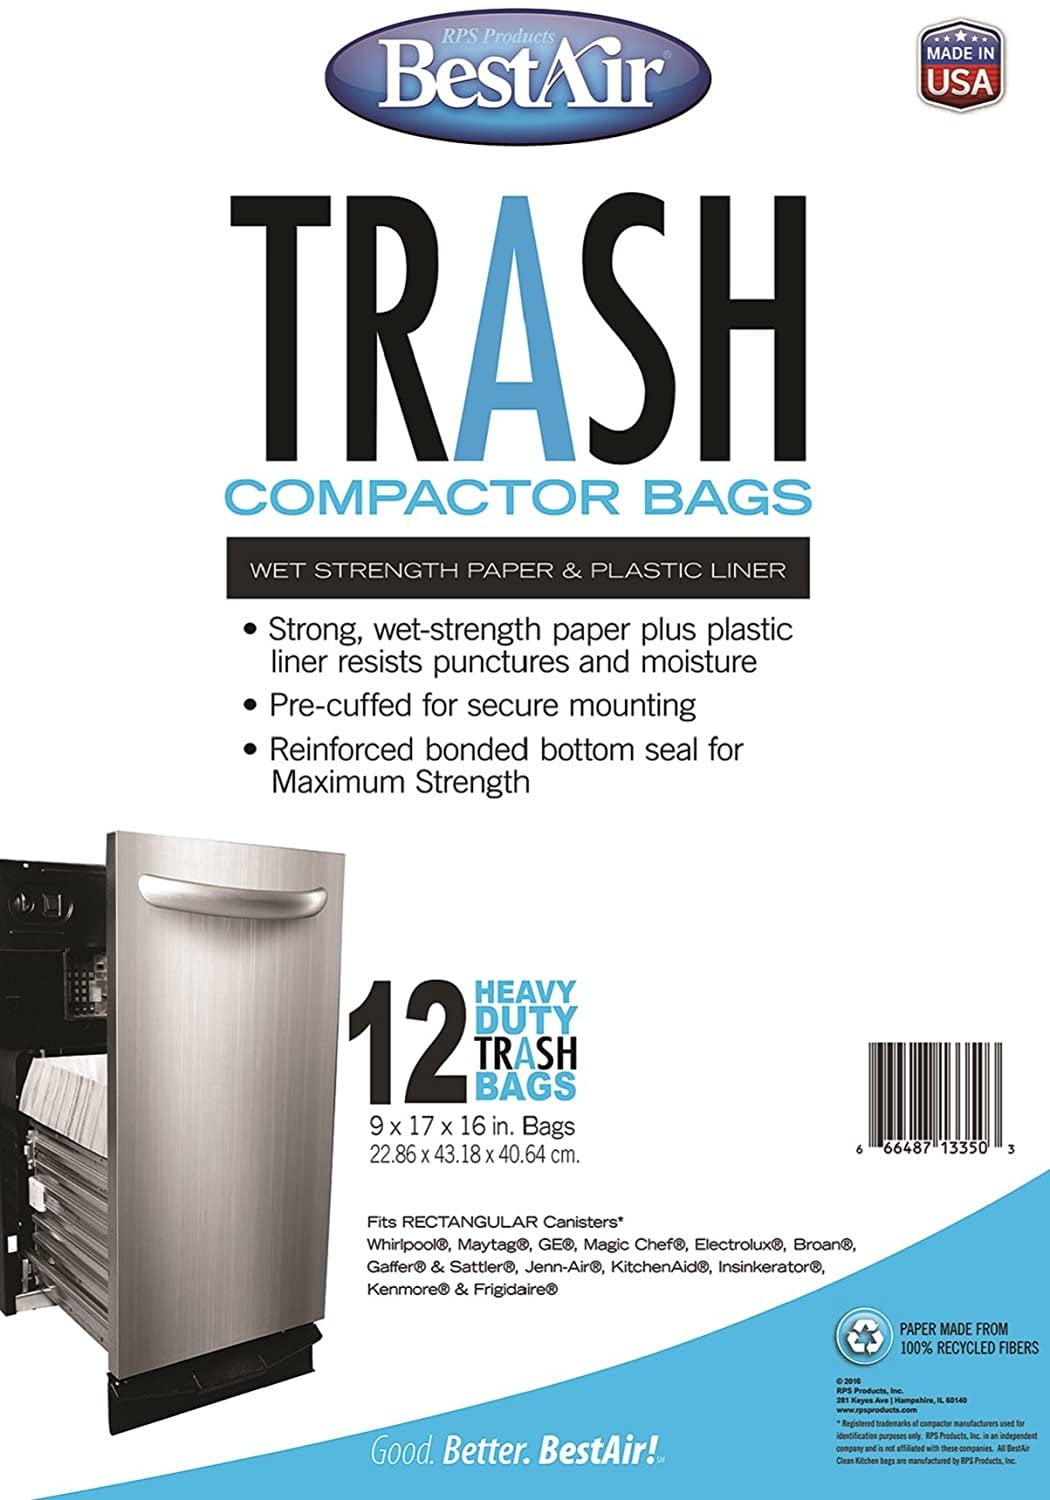 BestAir Trash Compactor Bags 12 Bags Strong Wet-Strength Paper & Plastic Liner 